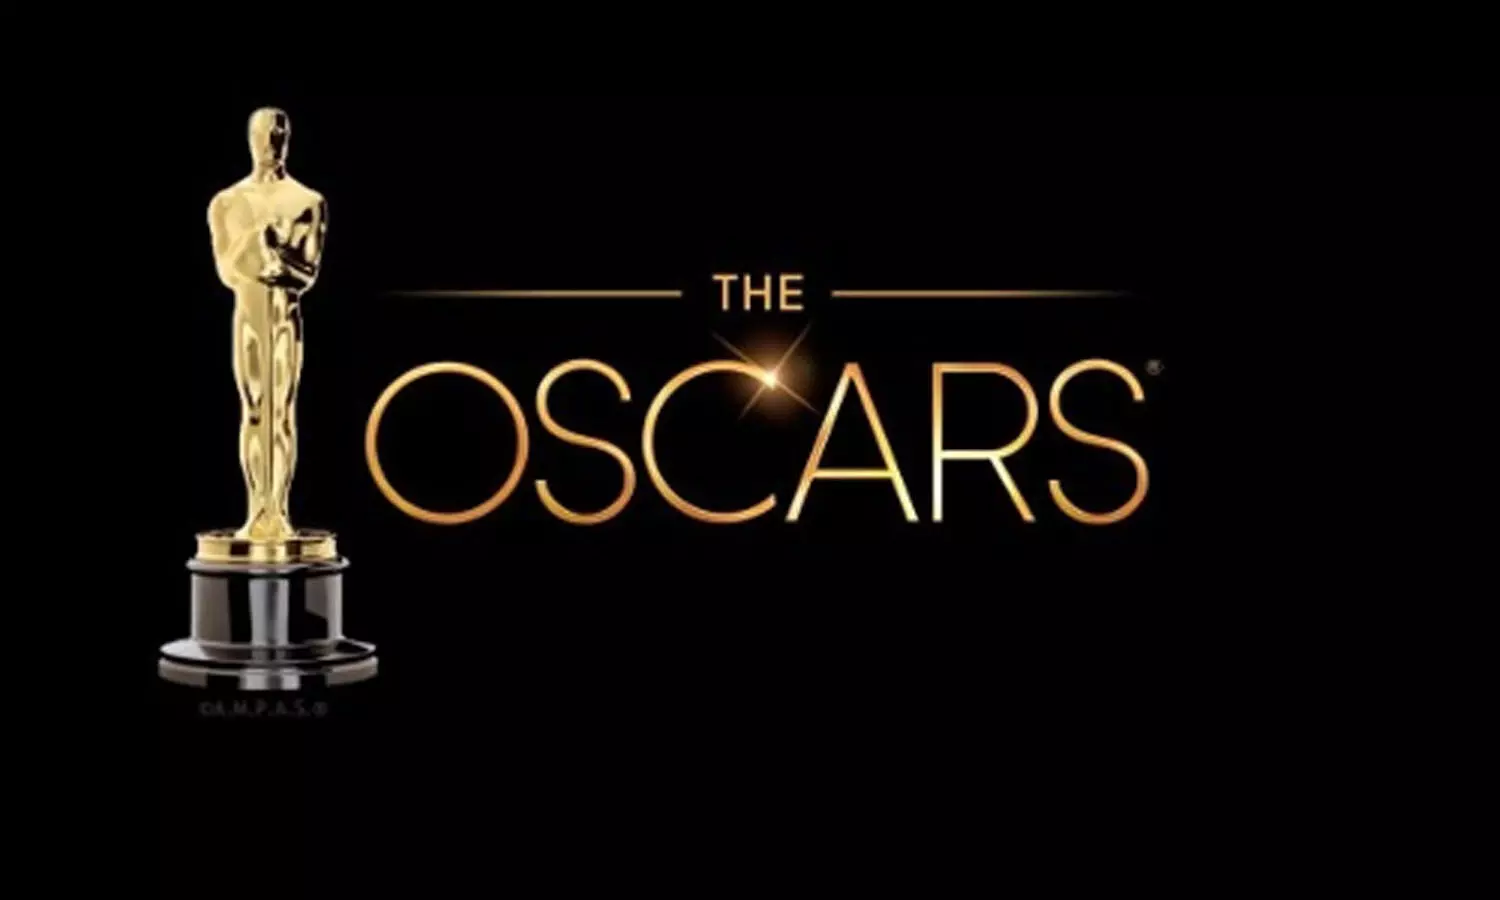 Here is where you can watch the Oscars ceremony live